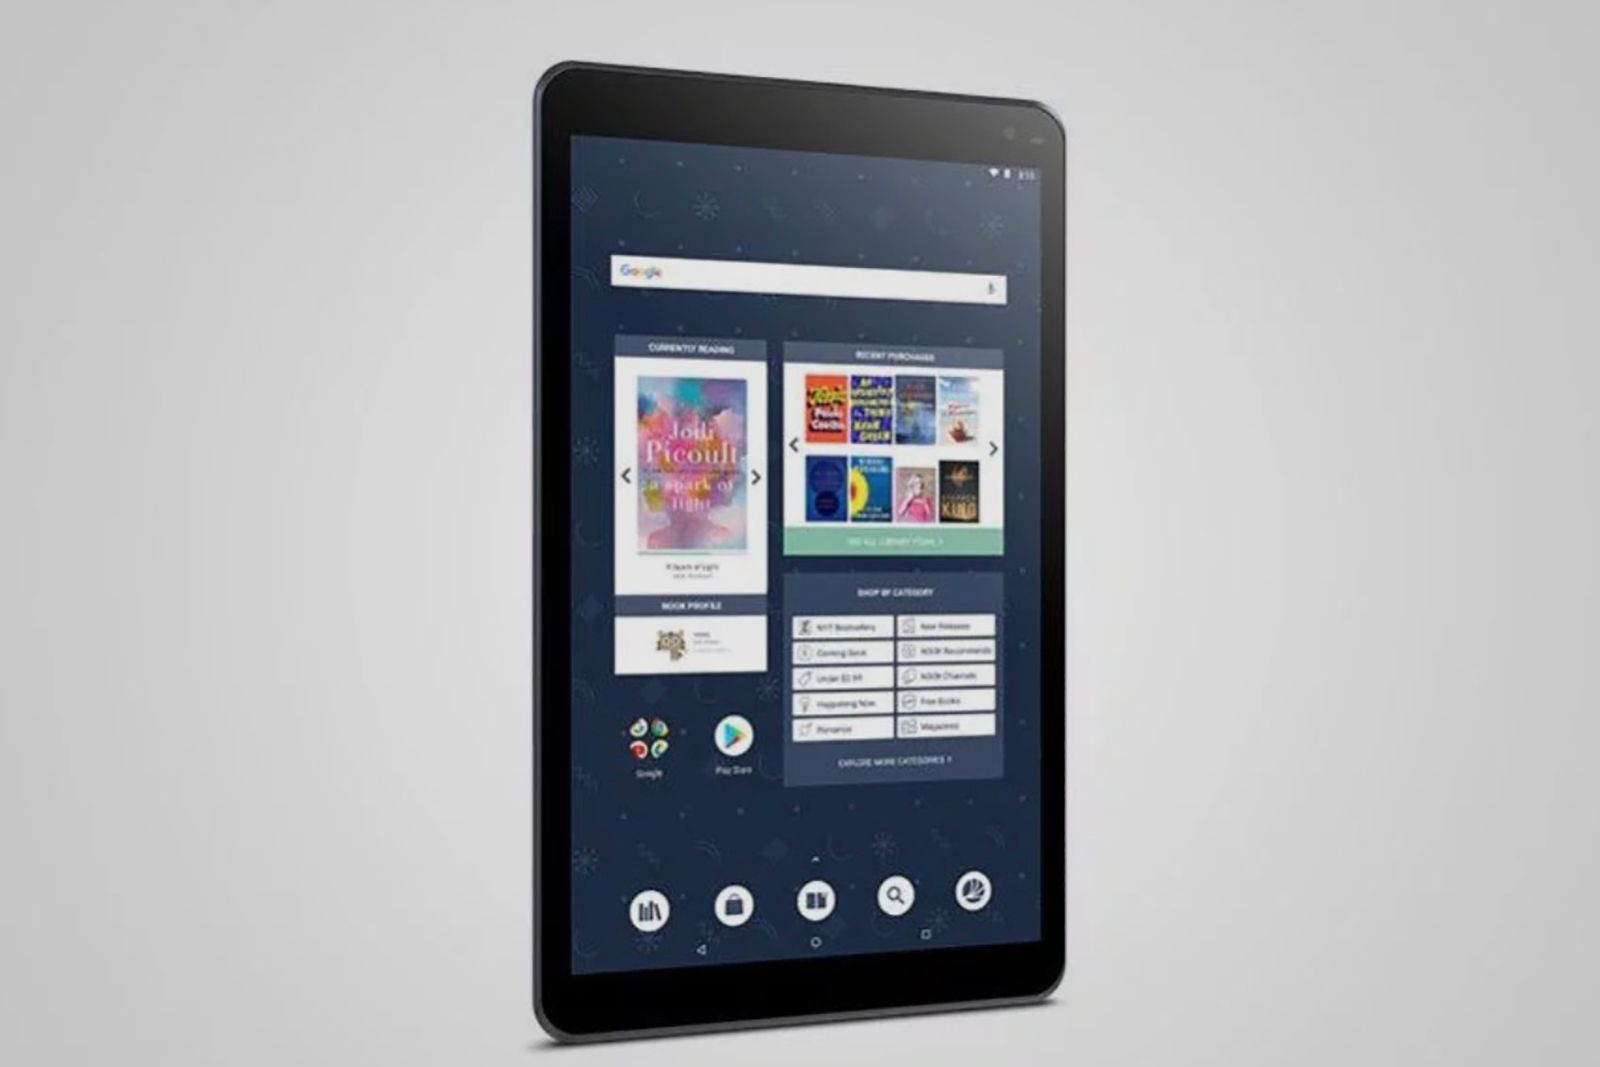 Barnes  Noble made a Nook-branded Android tablet with Play Store access image 1